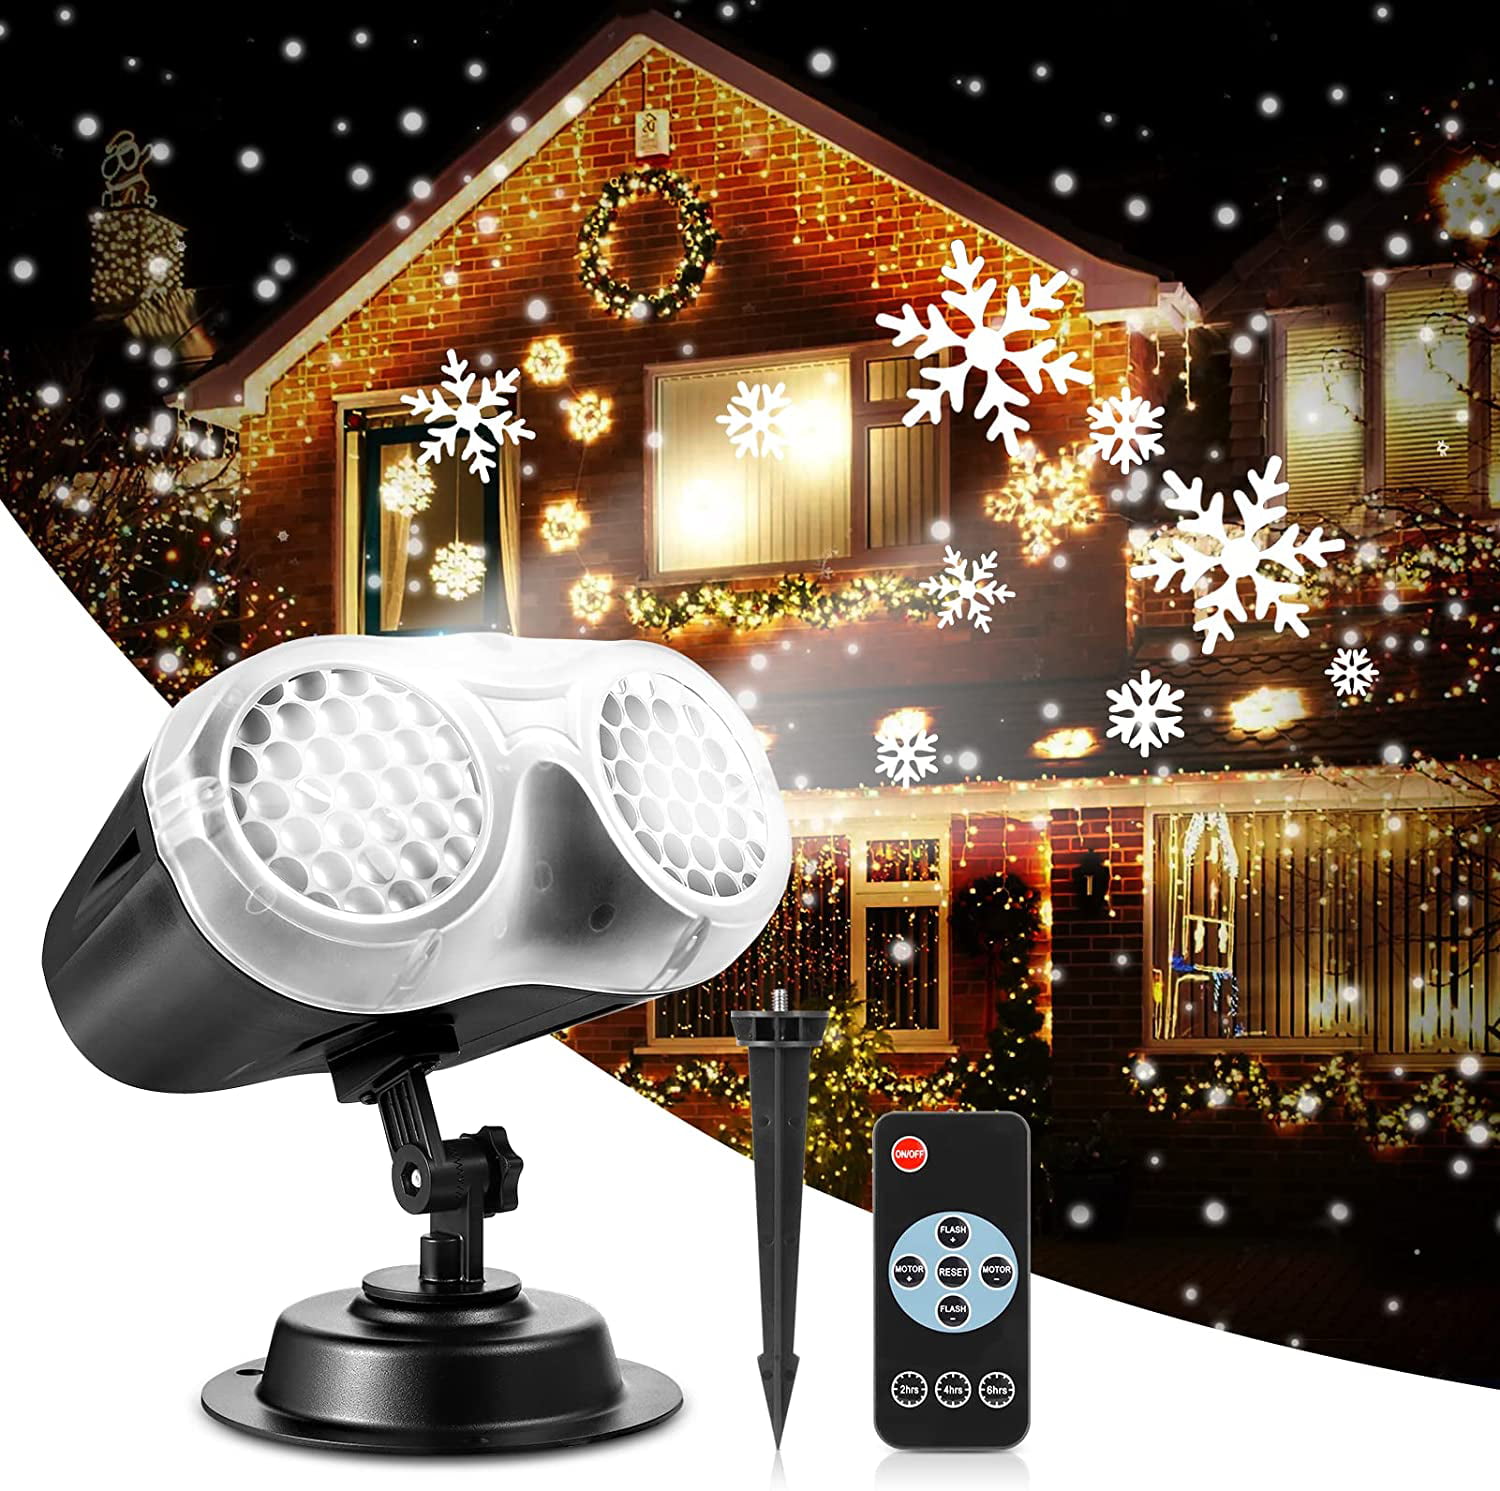 Christmas Outdoor LED Snowflake Projector Lights Laser Christmas Lights w/Remote 